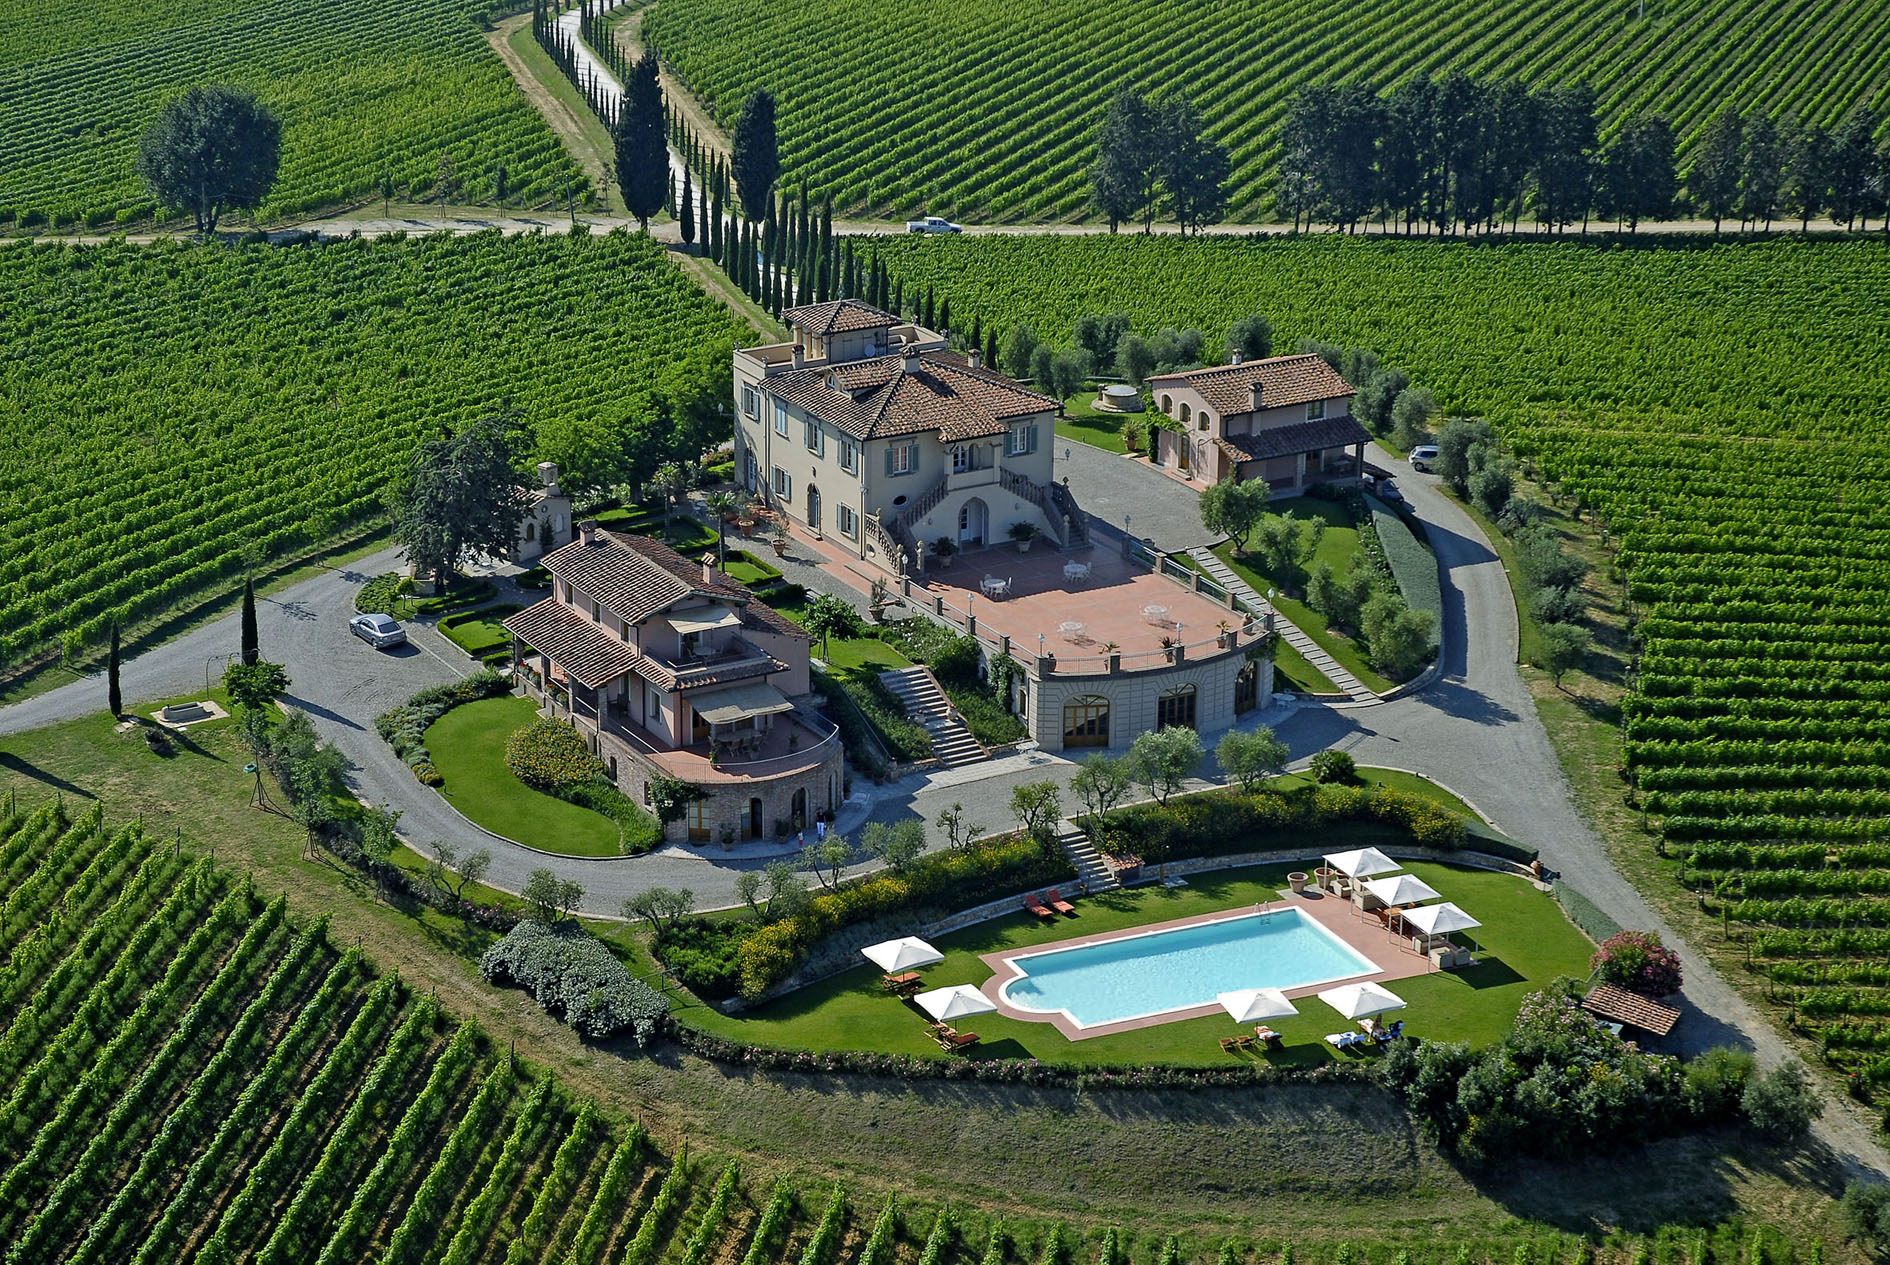 Stay for two people and three nights at Poggio al Casone resort in the Pisan countryside